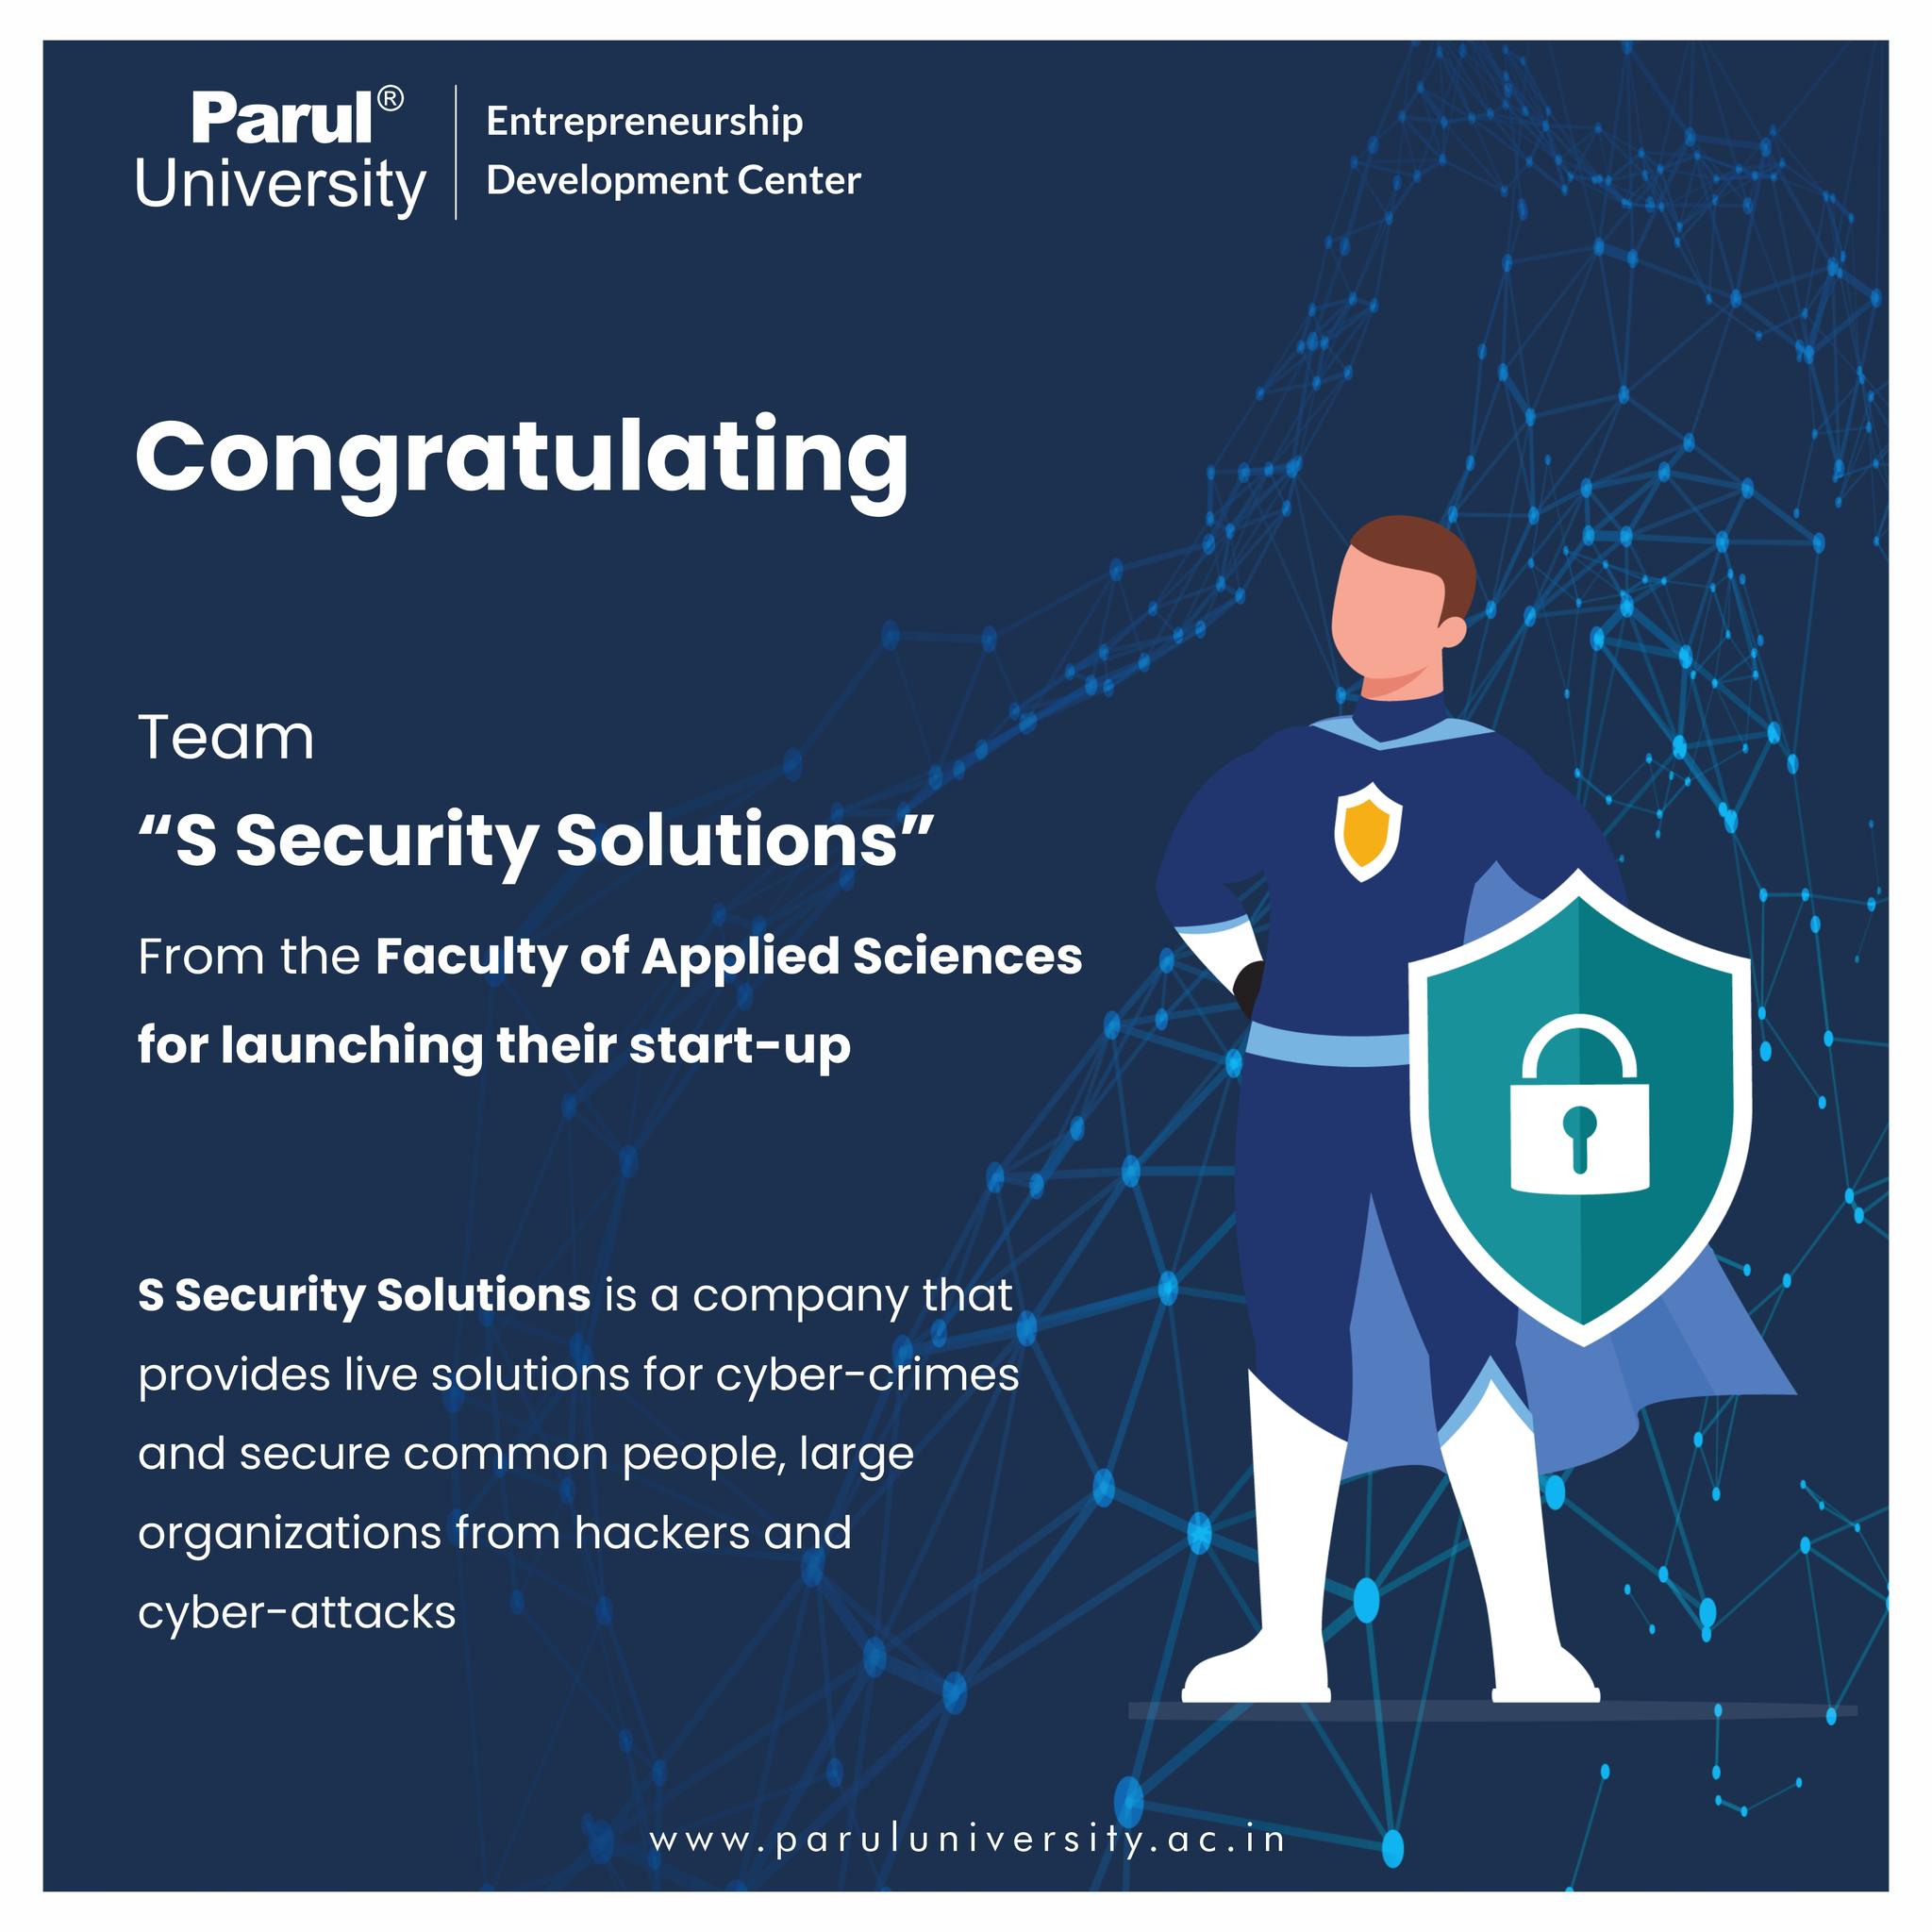 PU’s Team S Security Solutions successfully launches a cyber security company